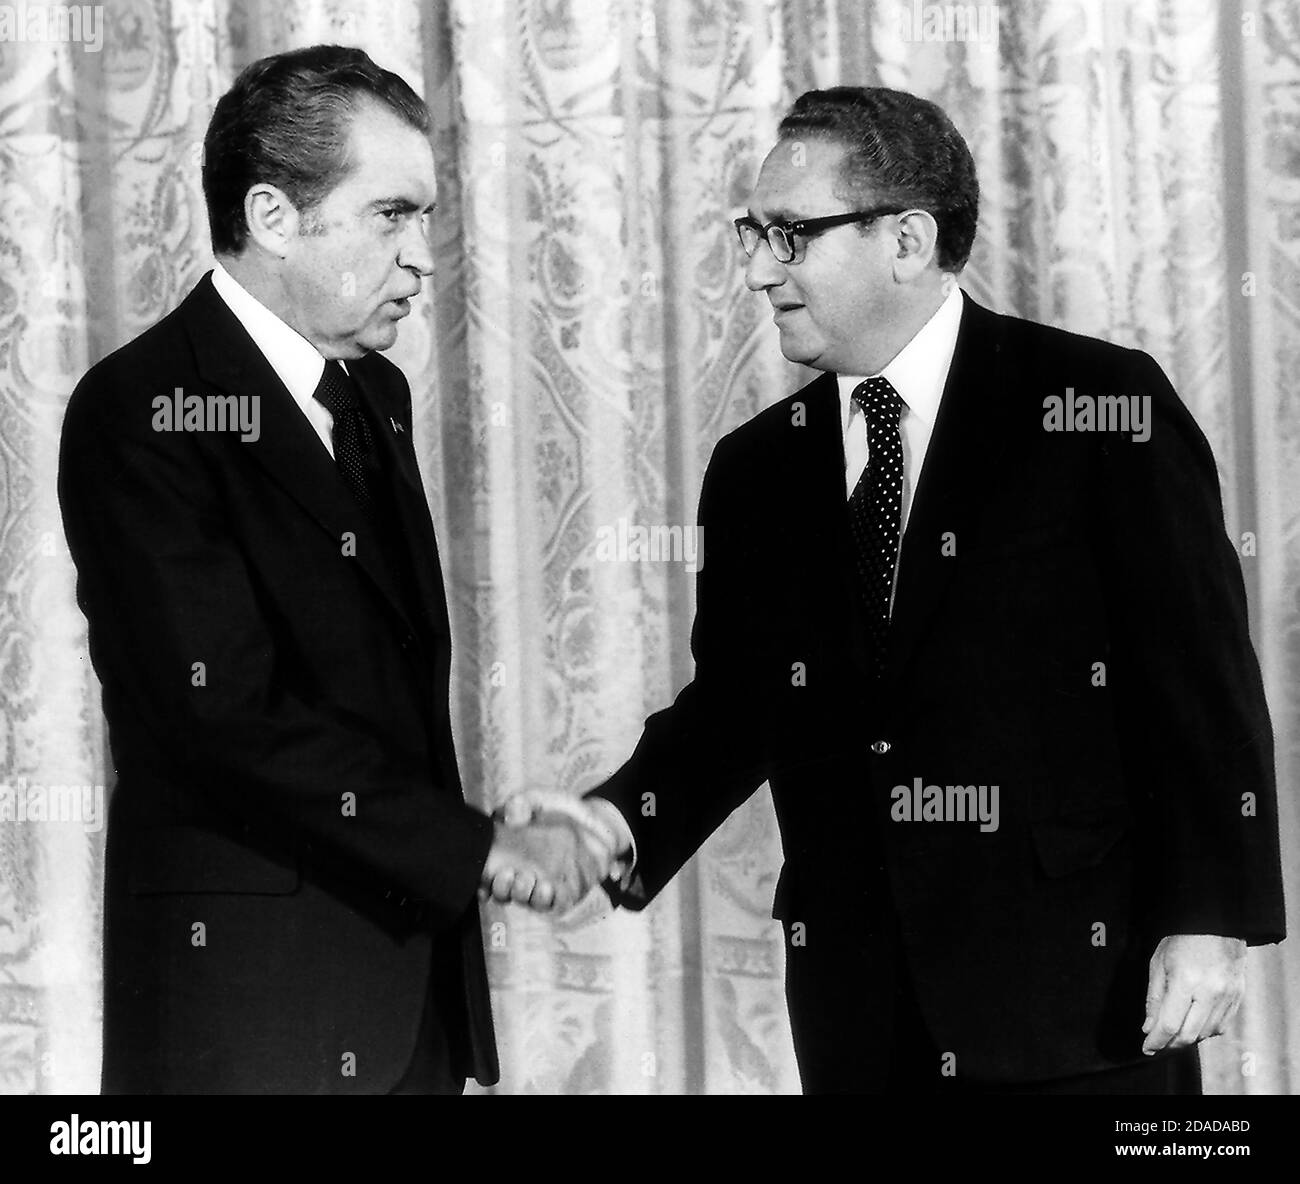 United States President Richard M. Nixon congratulates Henry A. Kissinger after Kissinger was sworn-in as the 56th United States Secretary of State in the East Room of the White House on September 22, 1973. Kissinger will continue to serve as National Security Advisor. He is the first naturalized citizen to serve as Secretary of State.Credit: Benjamin E. 'Gene' Forte - CNP | usage worldwide Stock Photo